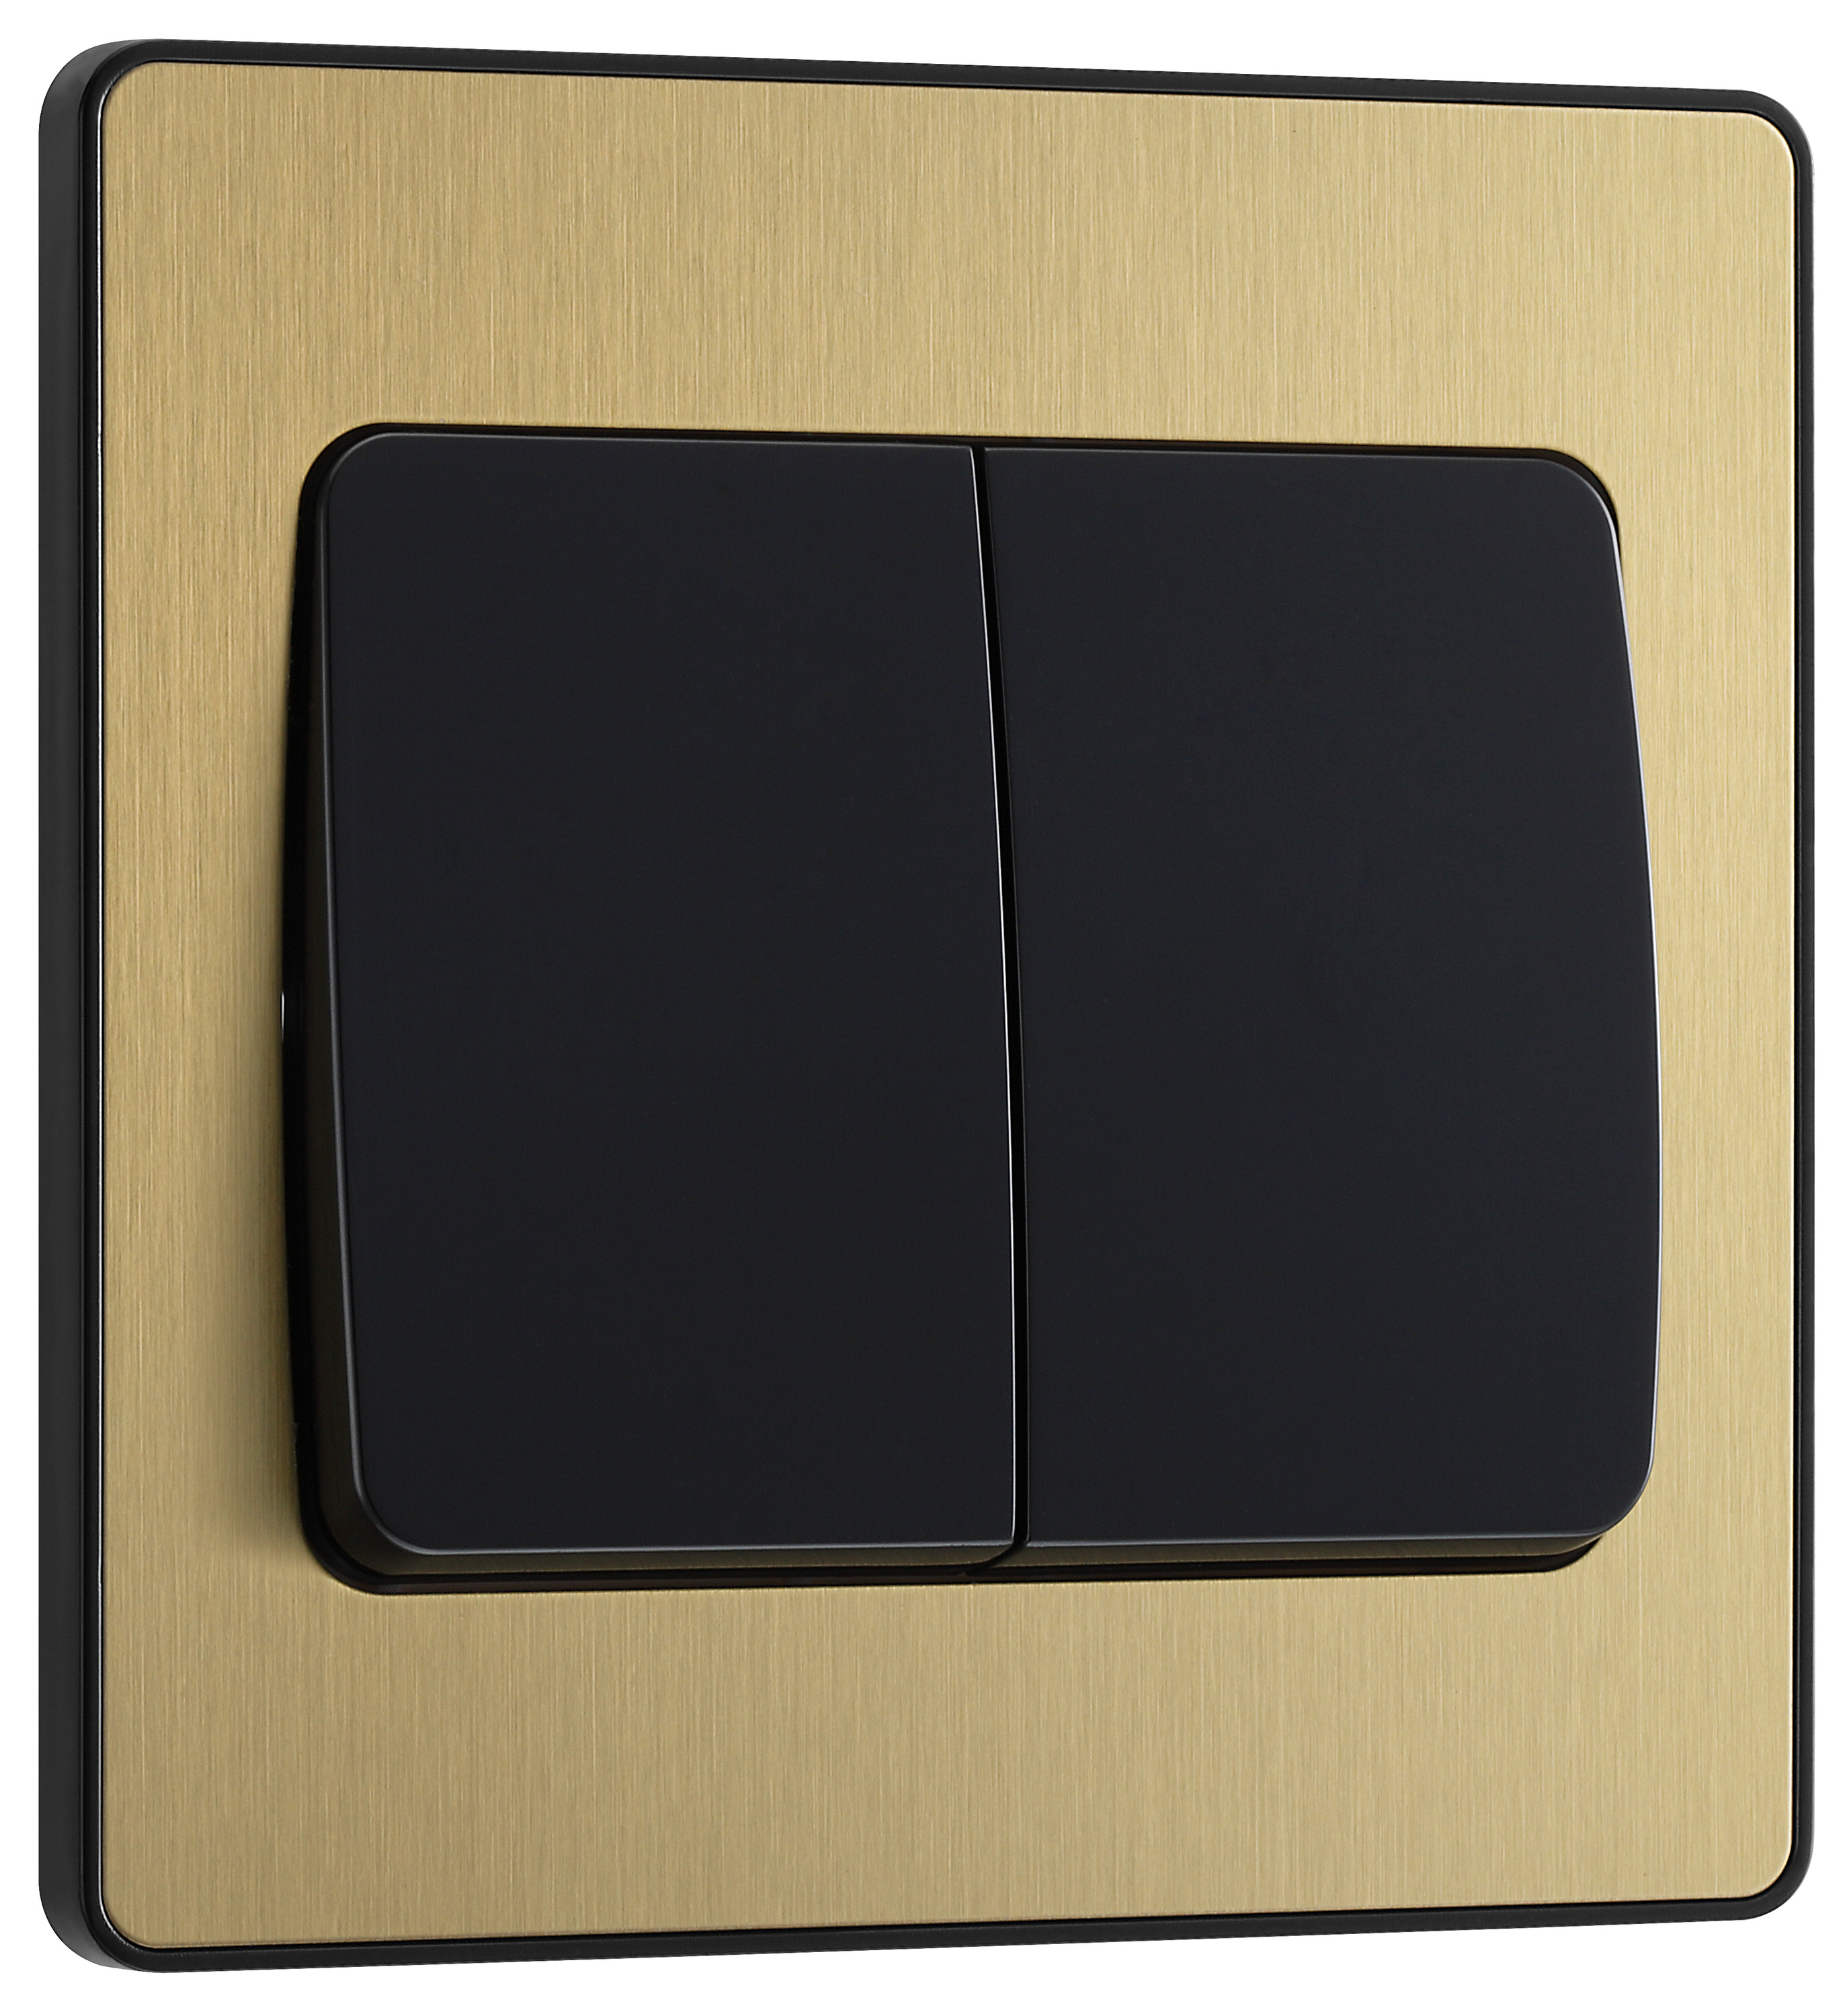 Image of BG Evolve Brushed Brass 20A 16Ax Wide Rocker Double Light Switch - 2 Way